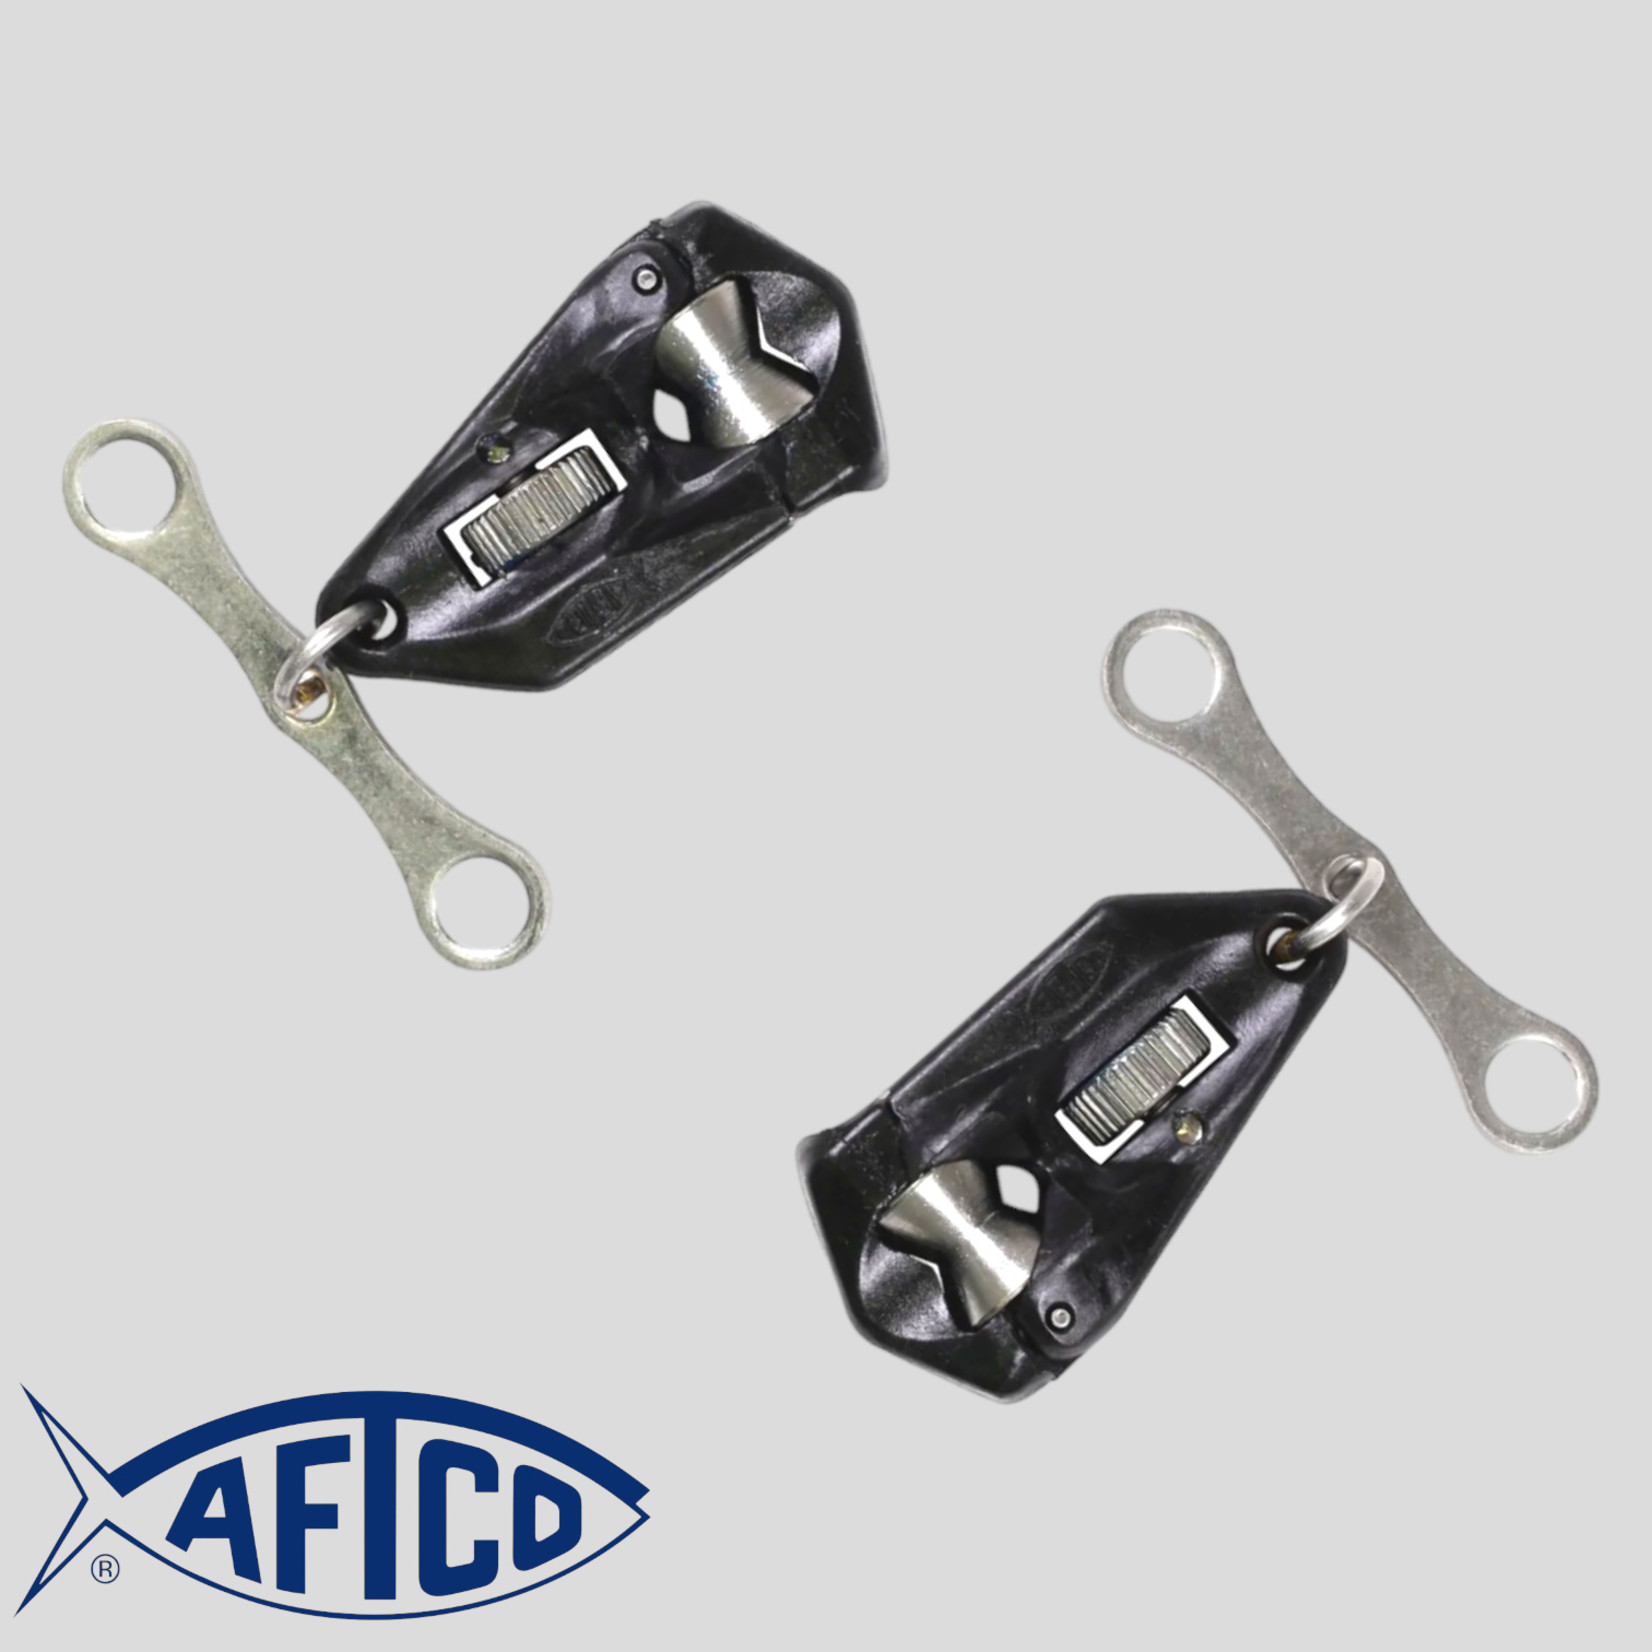 Aftco Roller Troller Release Clips - Tyalure Tackle